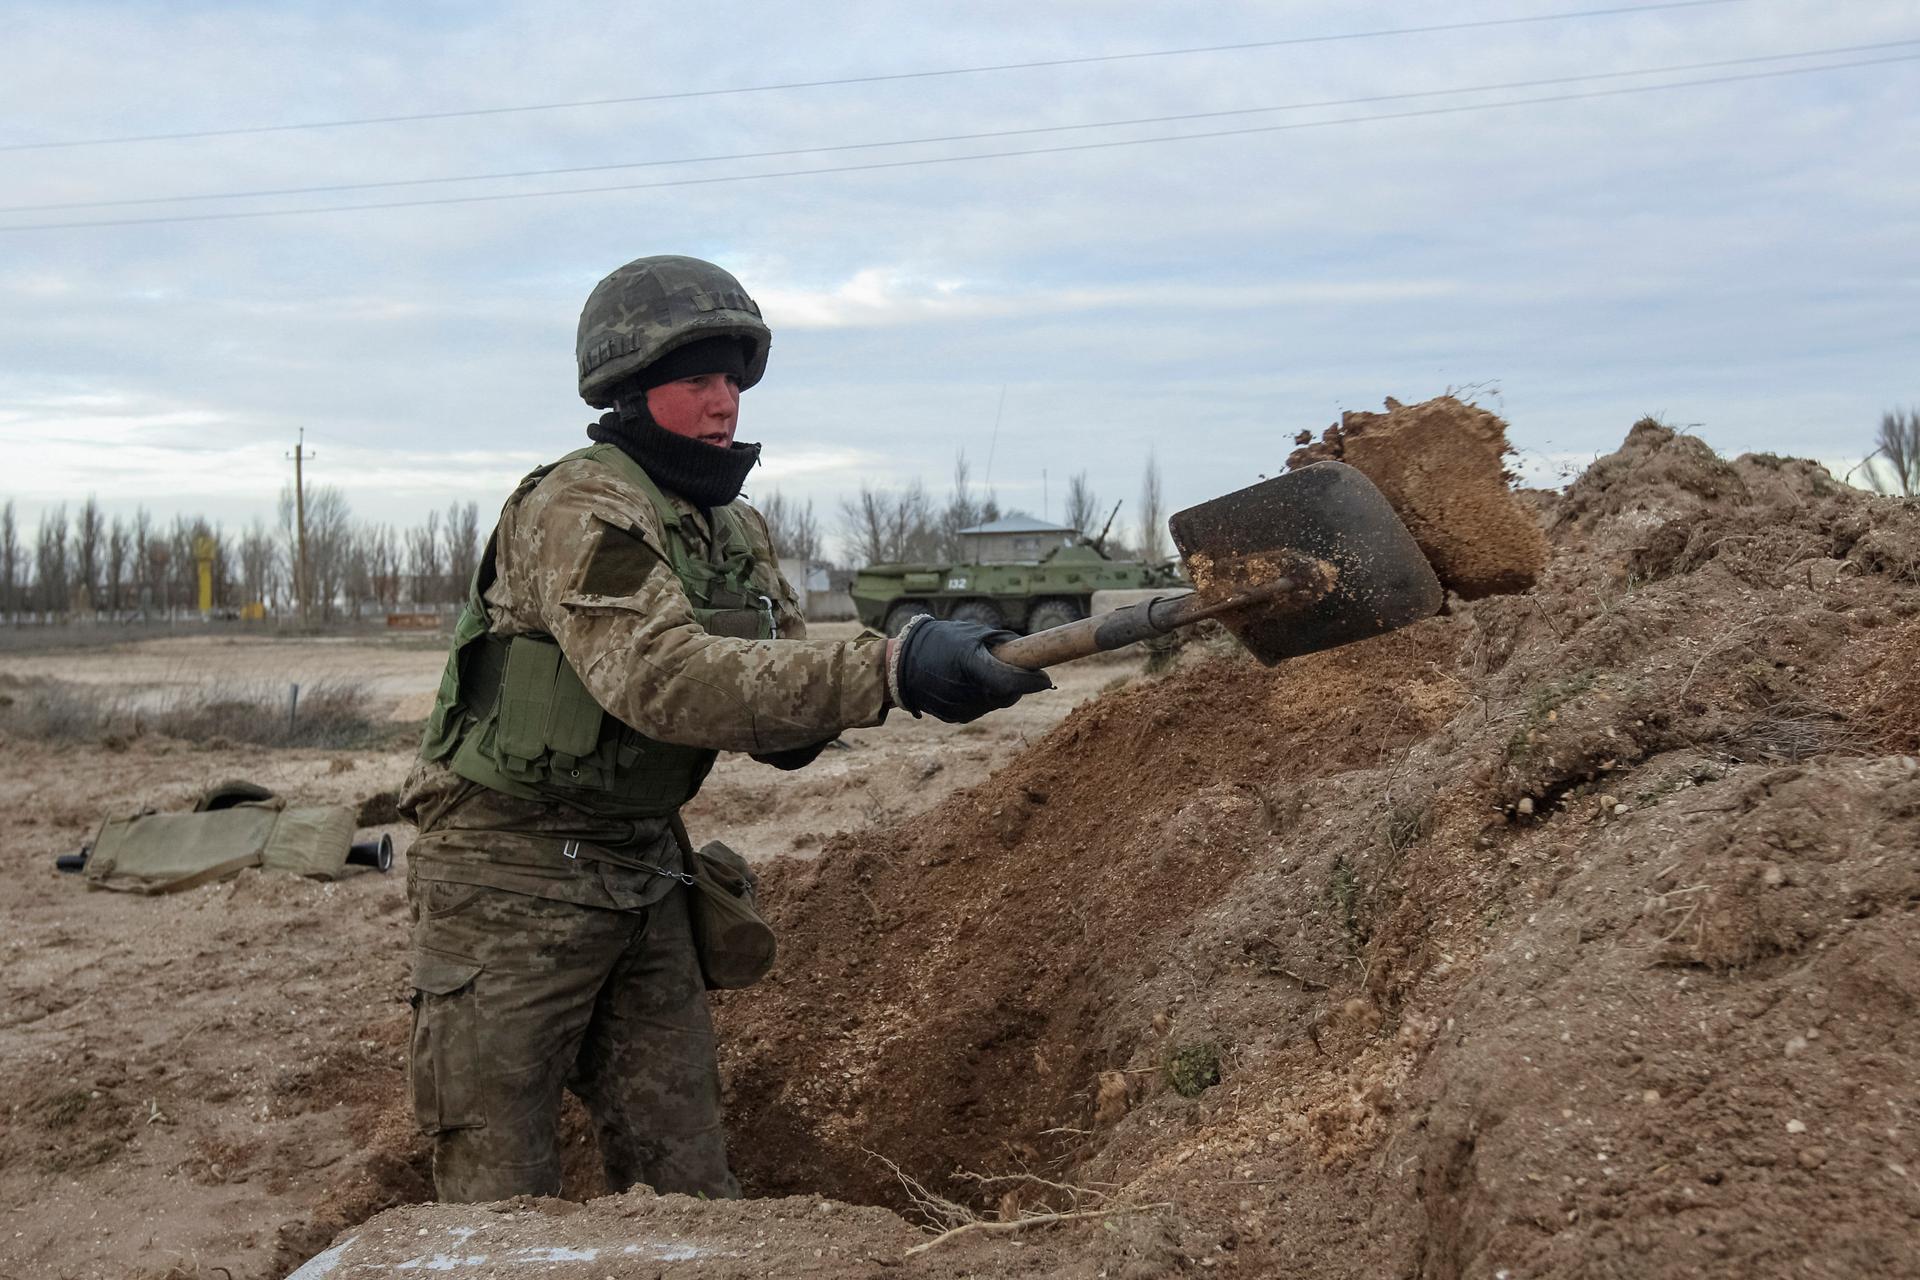 A Ukrainian serviceman digs a trench at a checkpoint facing Russian-occupied Crimea. Ukraine's small frontier detachments would have difficulty stopping an all-out Russian attack, but would more likely be by-passed and isolated, on the "Crimean model" of